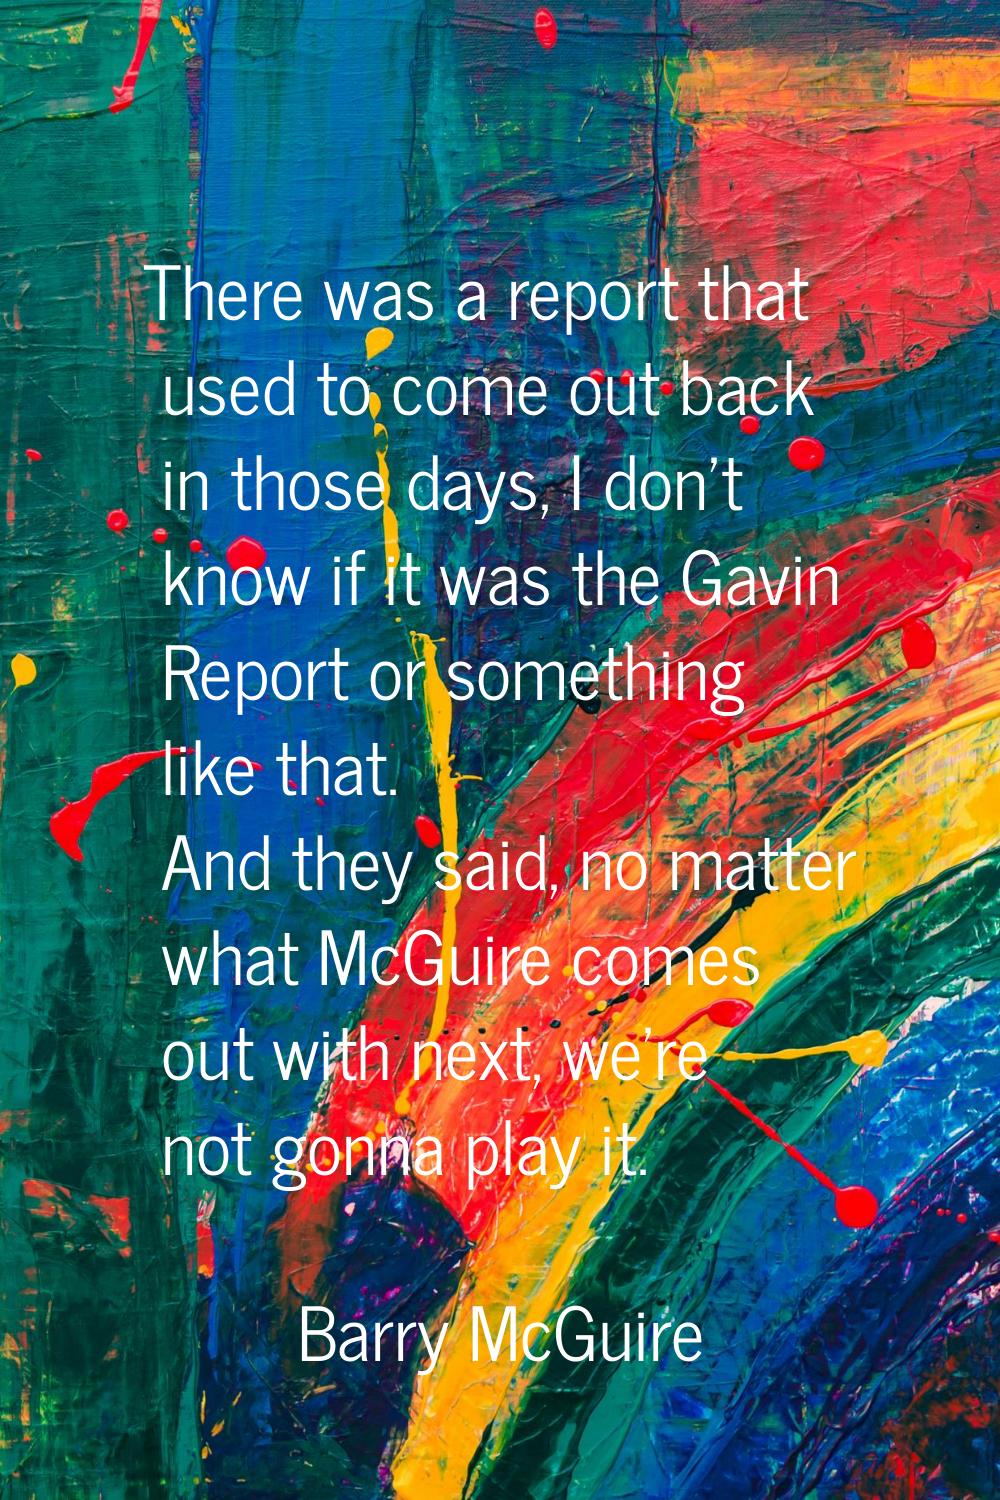 There was a report that used to come out back in those days, I don't know if it was the Gavin Repor